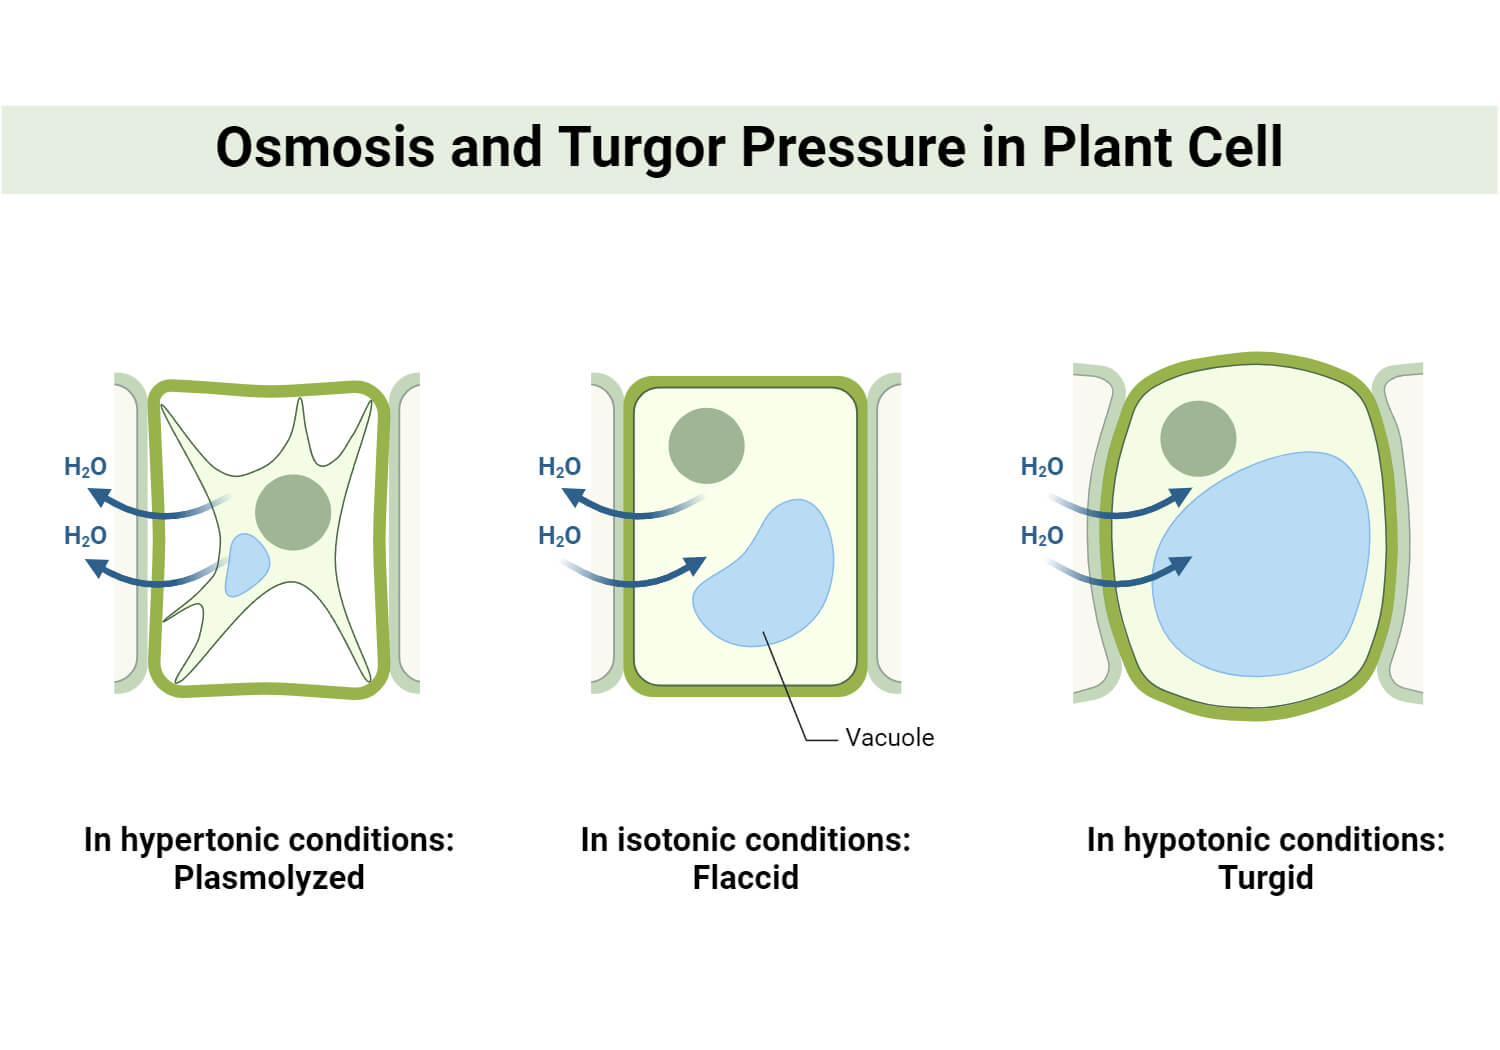 Osmosis and Turgor Pressure in Plant Cells